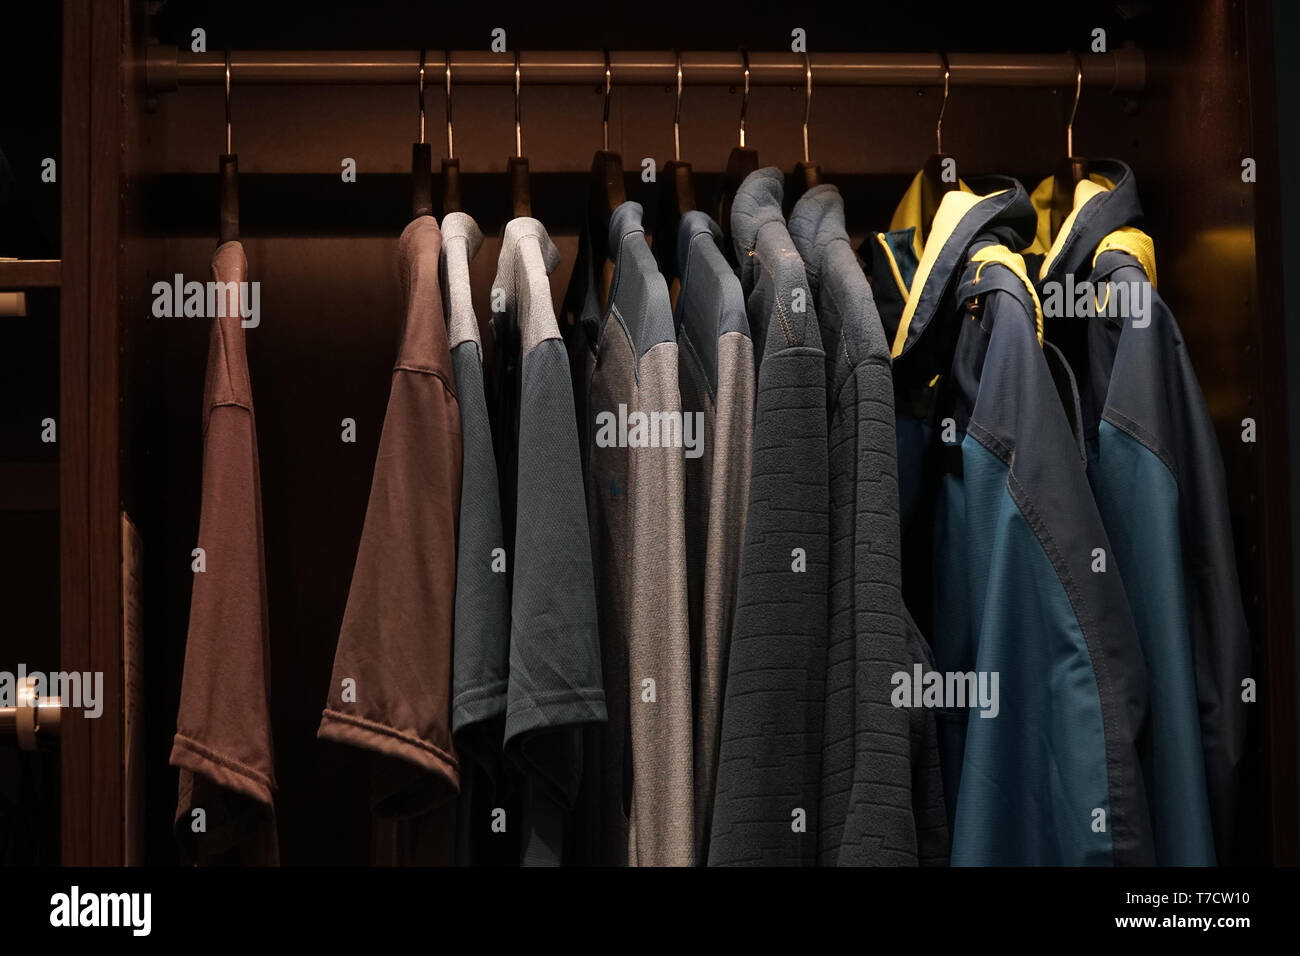 Clothes hanging in the closet on hangers, the concept of shopping or sales. Stock Photo